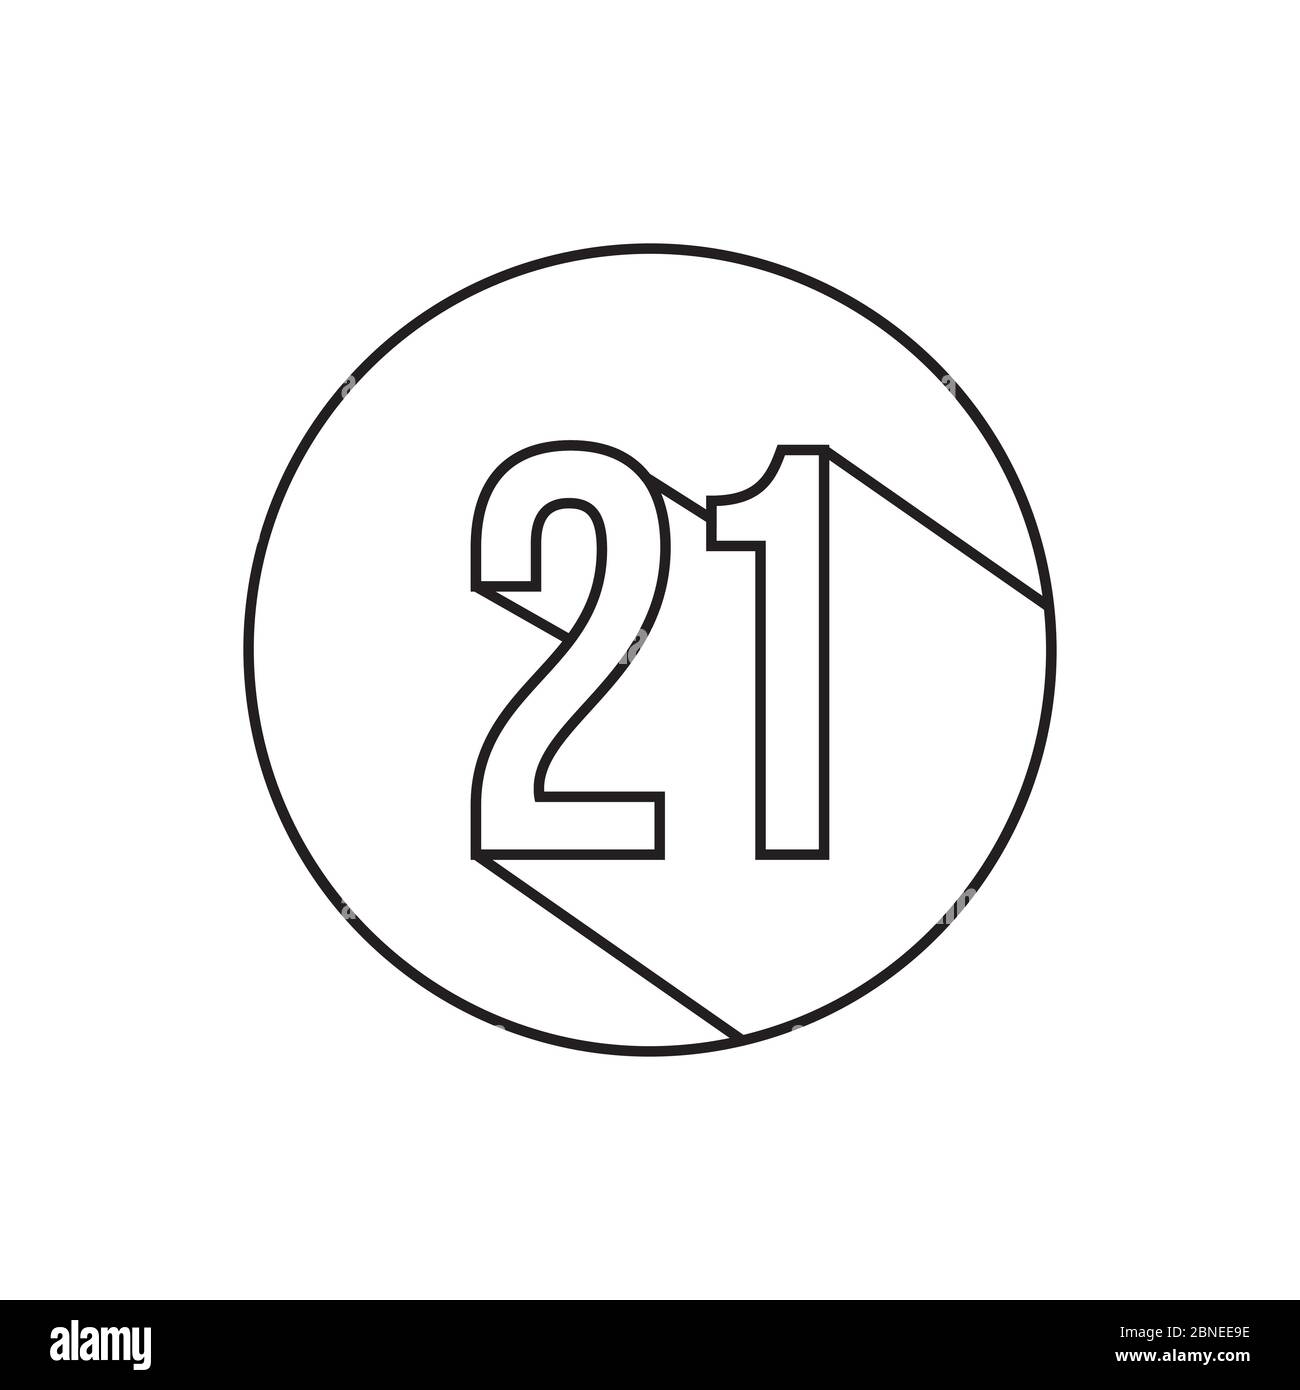 21 number lines icon symbol vector isolated on white background Stock Vector